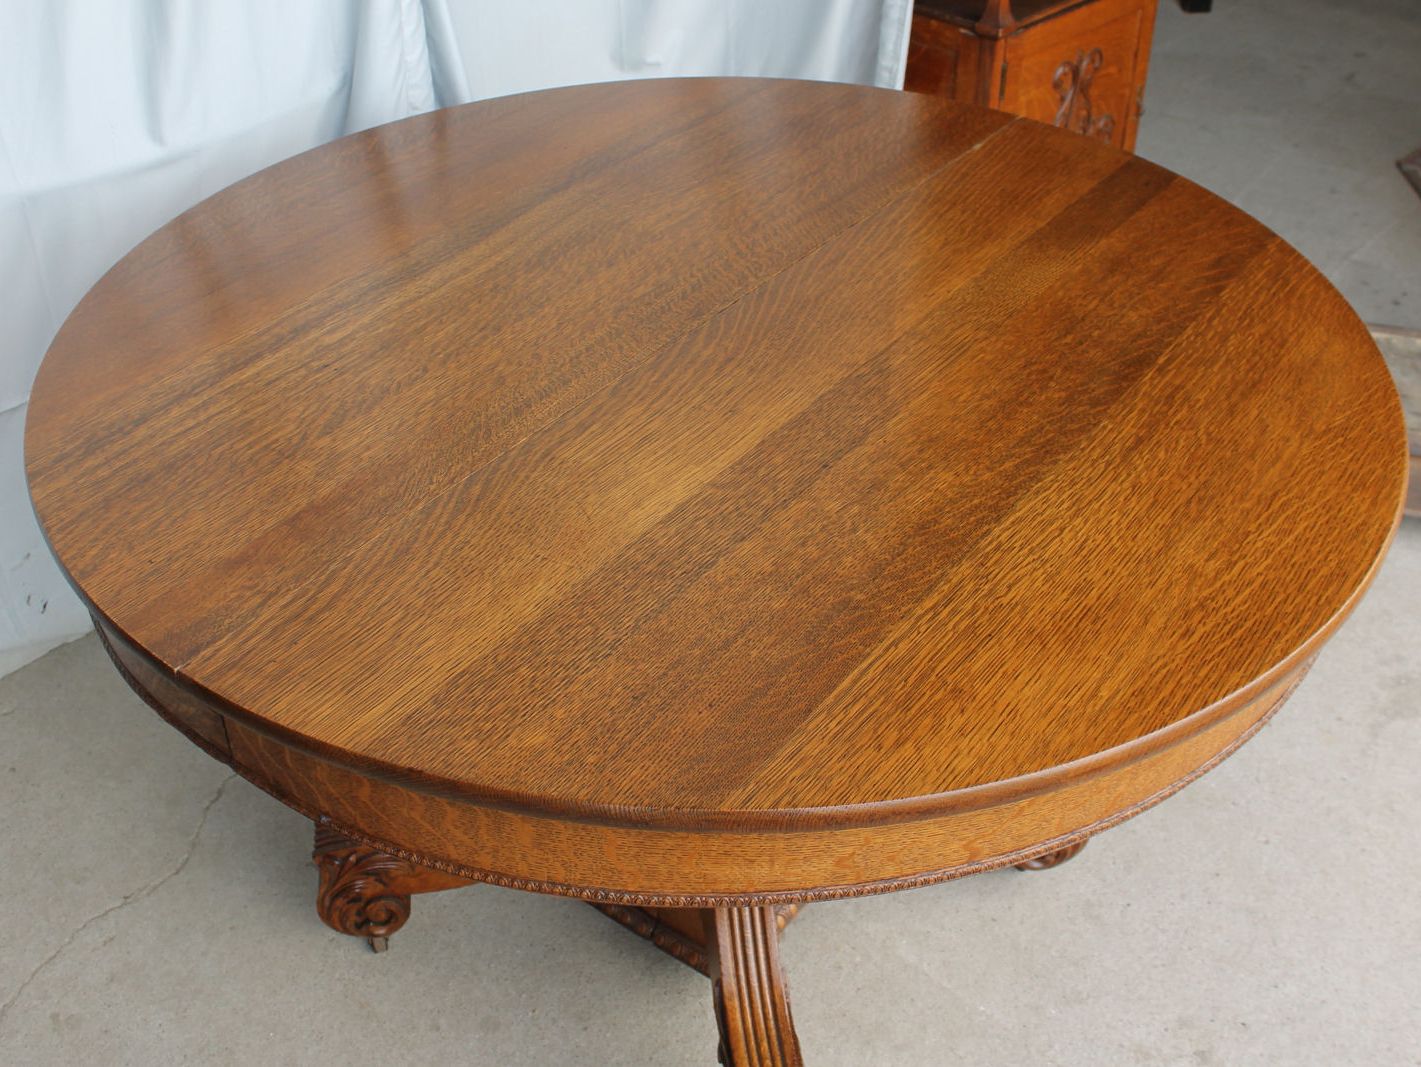 Antique Oak Dining Tables Throughout Best And Newest Bargain John'S Antiques » Blog Archive Antique Round Oak (View 3 of 15)